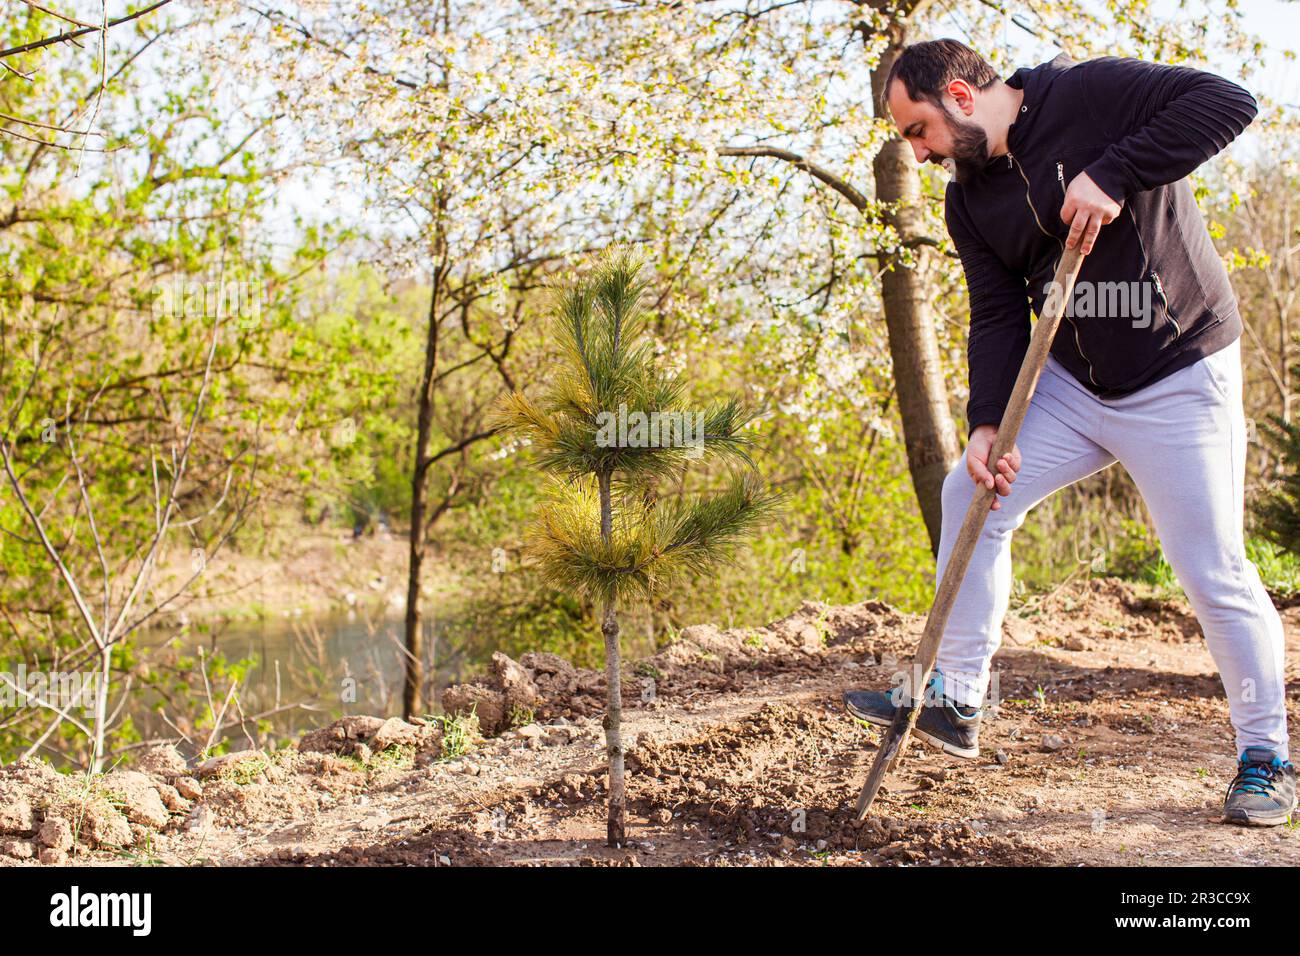 Working hard in early spring and enjoy results later Stock Photo